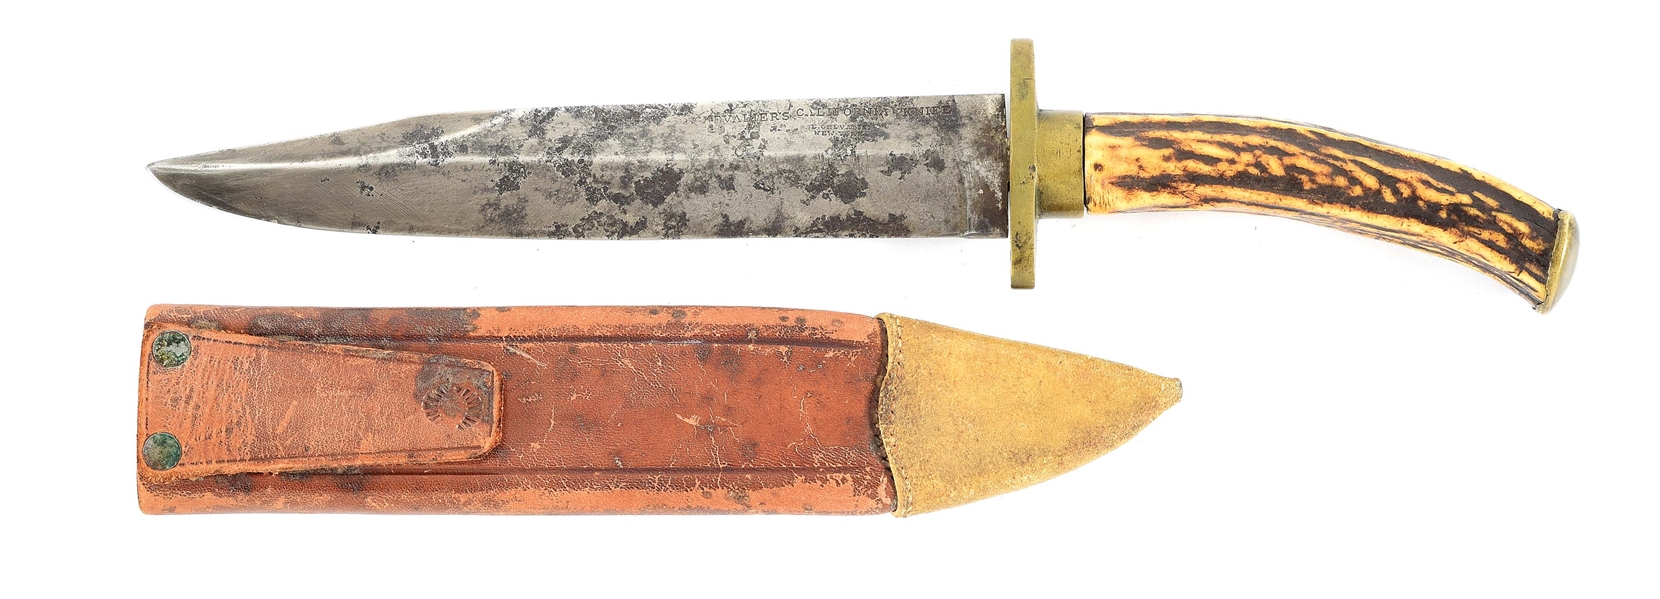 AMERICAN CALIFORNIA STAG HANDLED BOWIE KNIFE BY CHEVALIER.